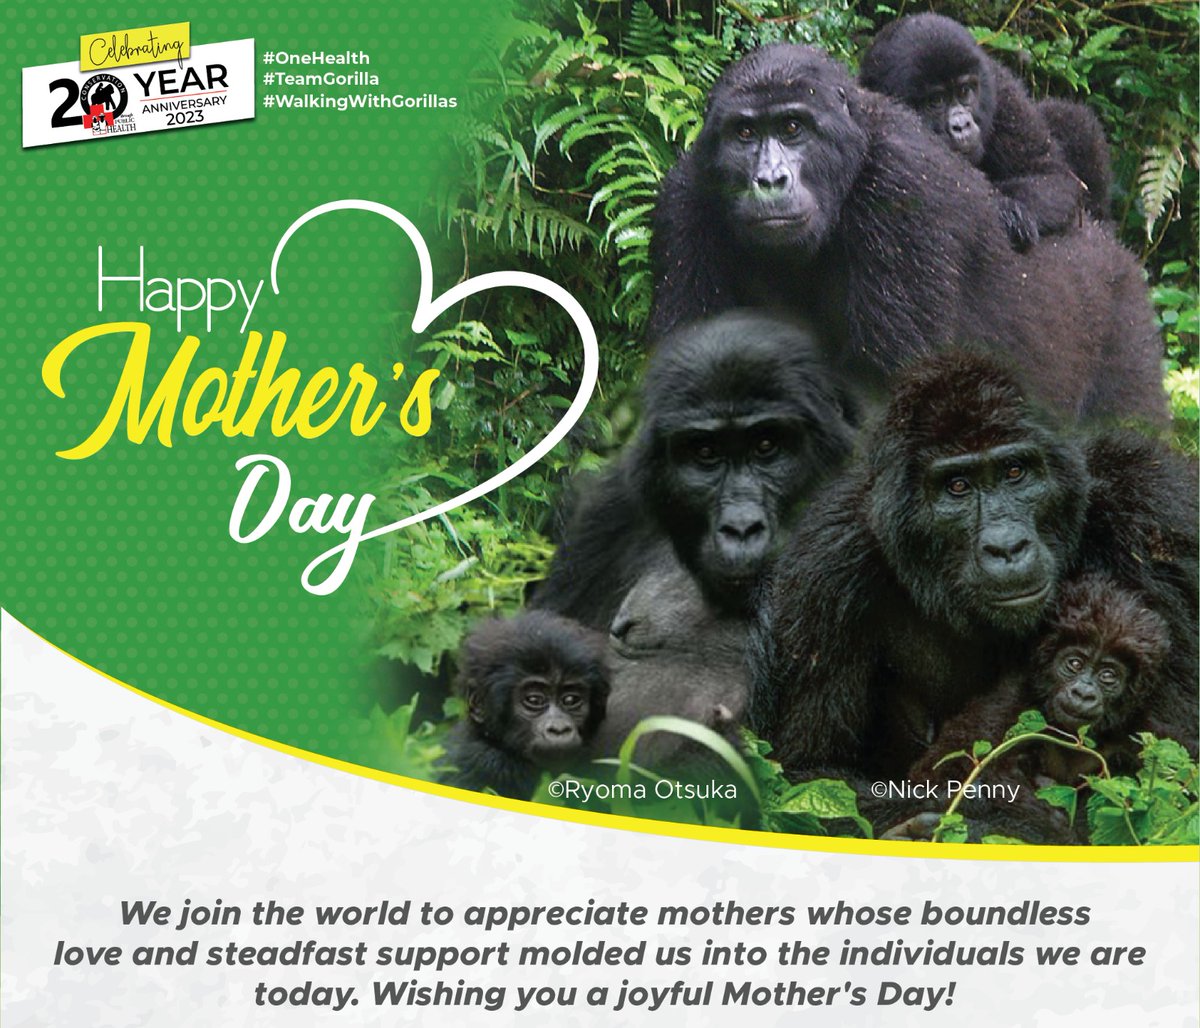 Sending our love and gratitude to our mums who have always been our guiding light. Happy Mother’s Day. #MothersDay #OneHealth #WalkingWithGorillas